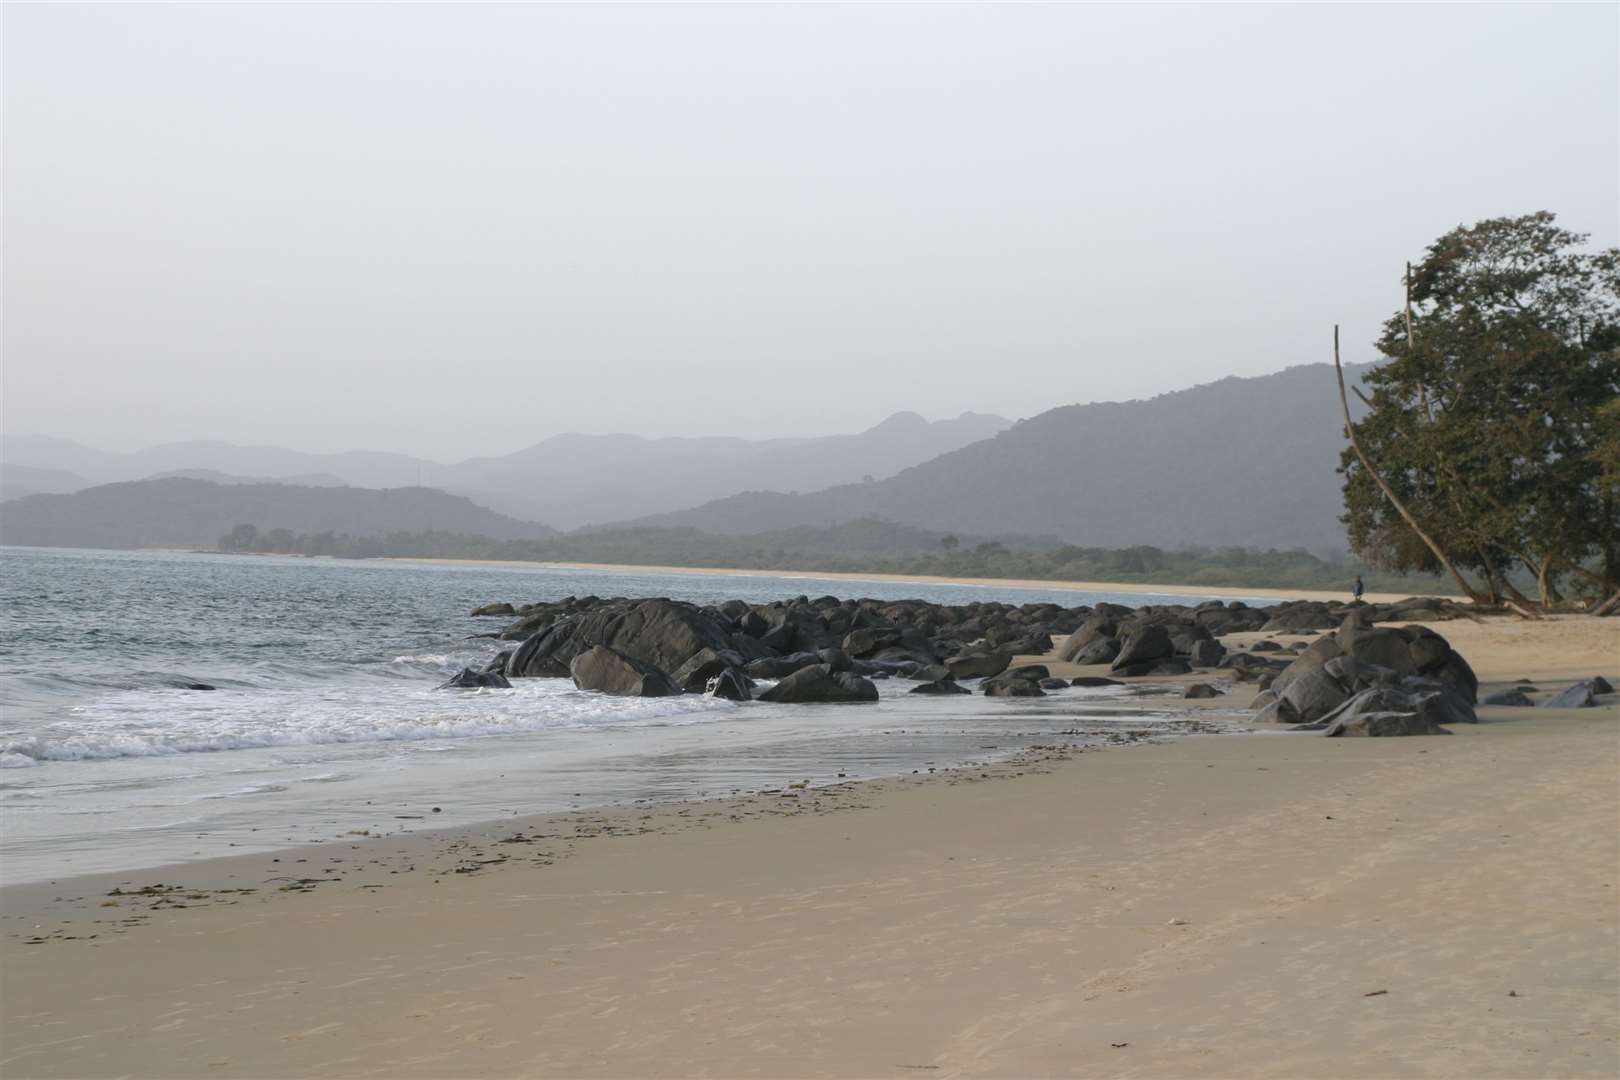 The Sierra Leone fishing village called kent has beaches that would rival any of ours. Picture: BigMikeSndTech/Flickr